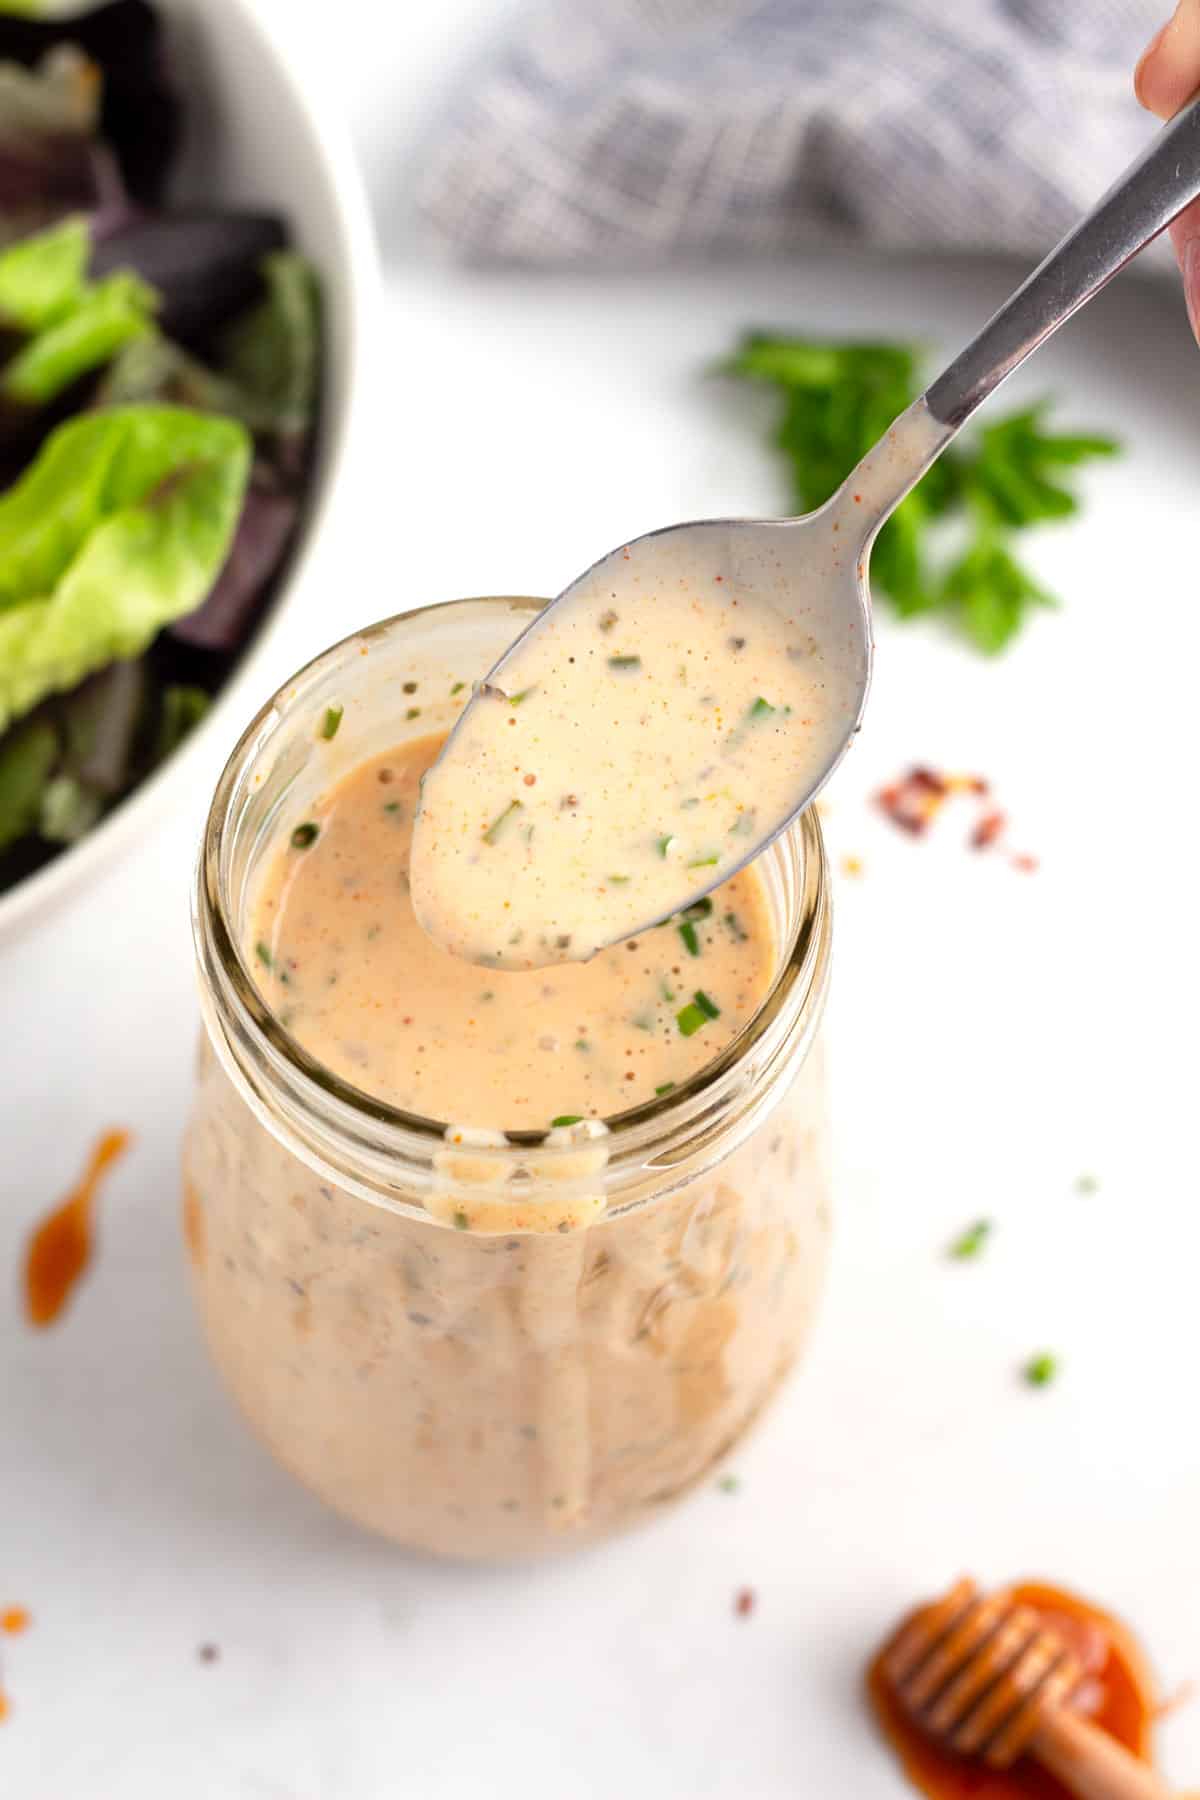 Spoonful of hot honey ranch sprinkled with cayenne pepper and chili flakes over a salad dressing jar.